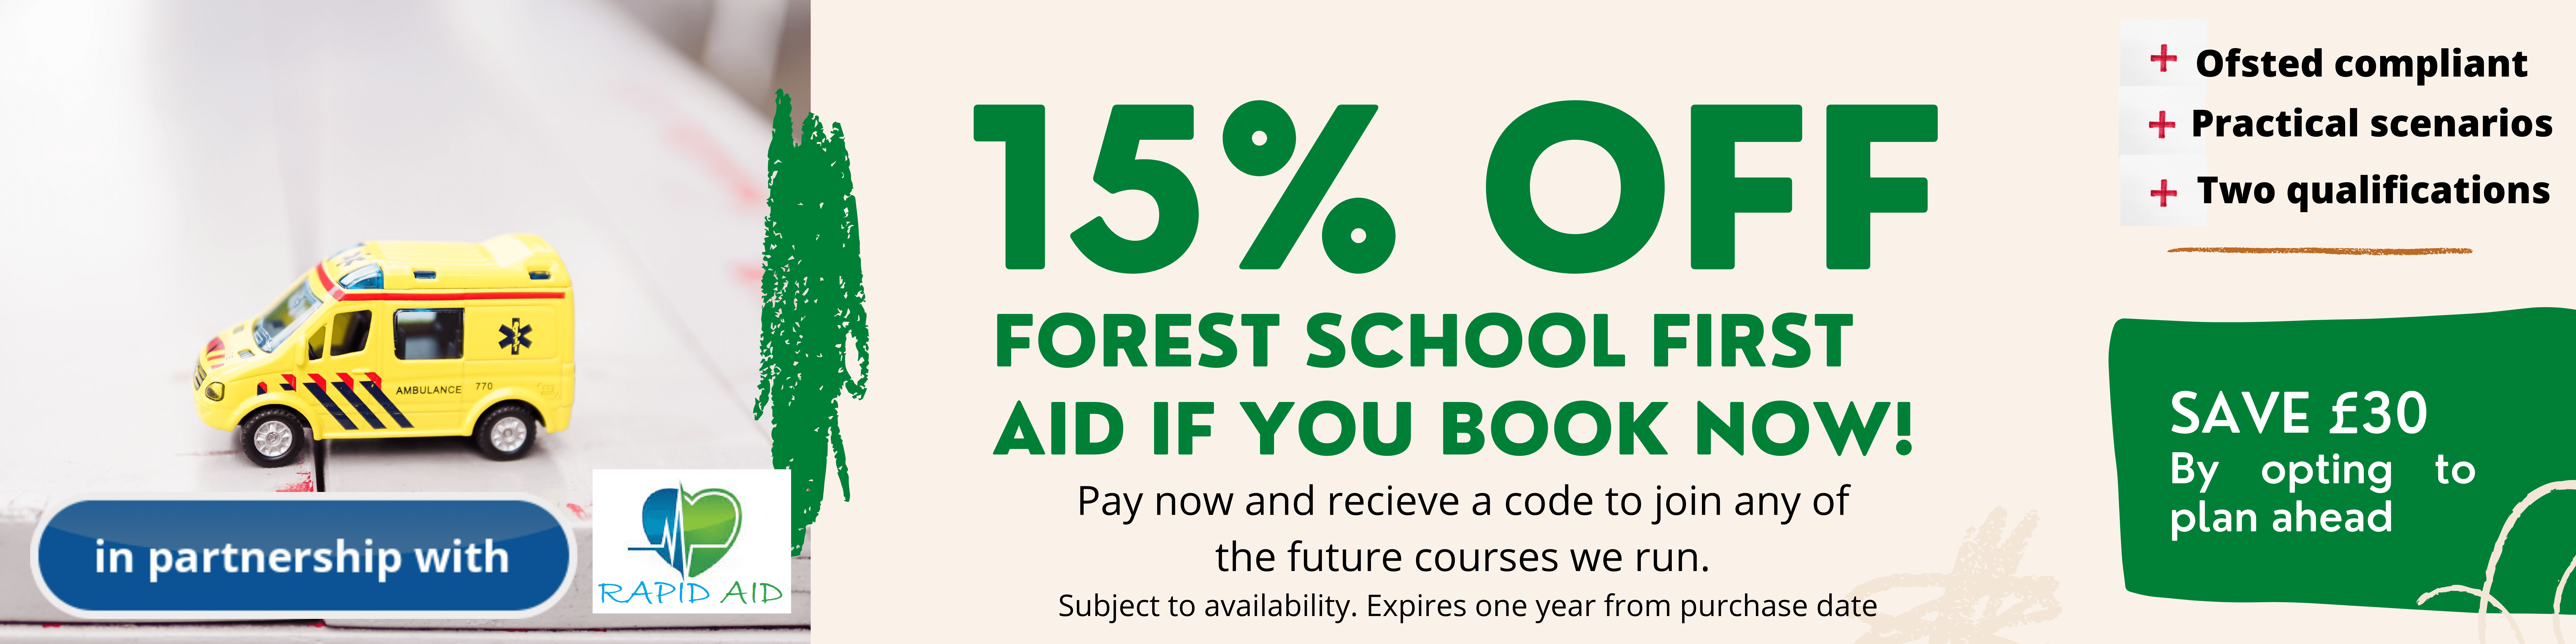 FirstAid_discount Forest School Leader Training - March 2022